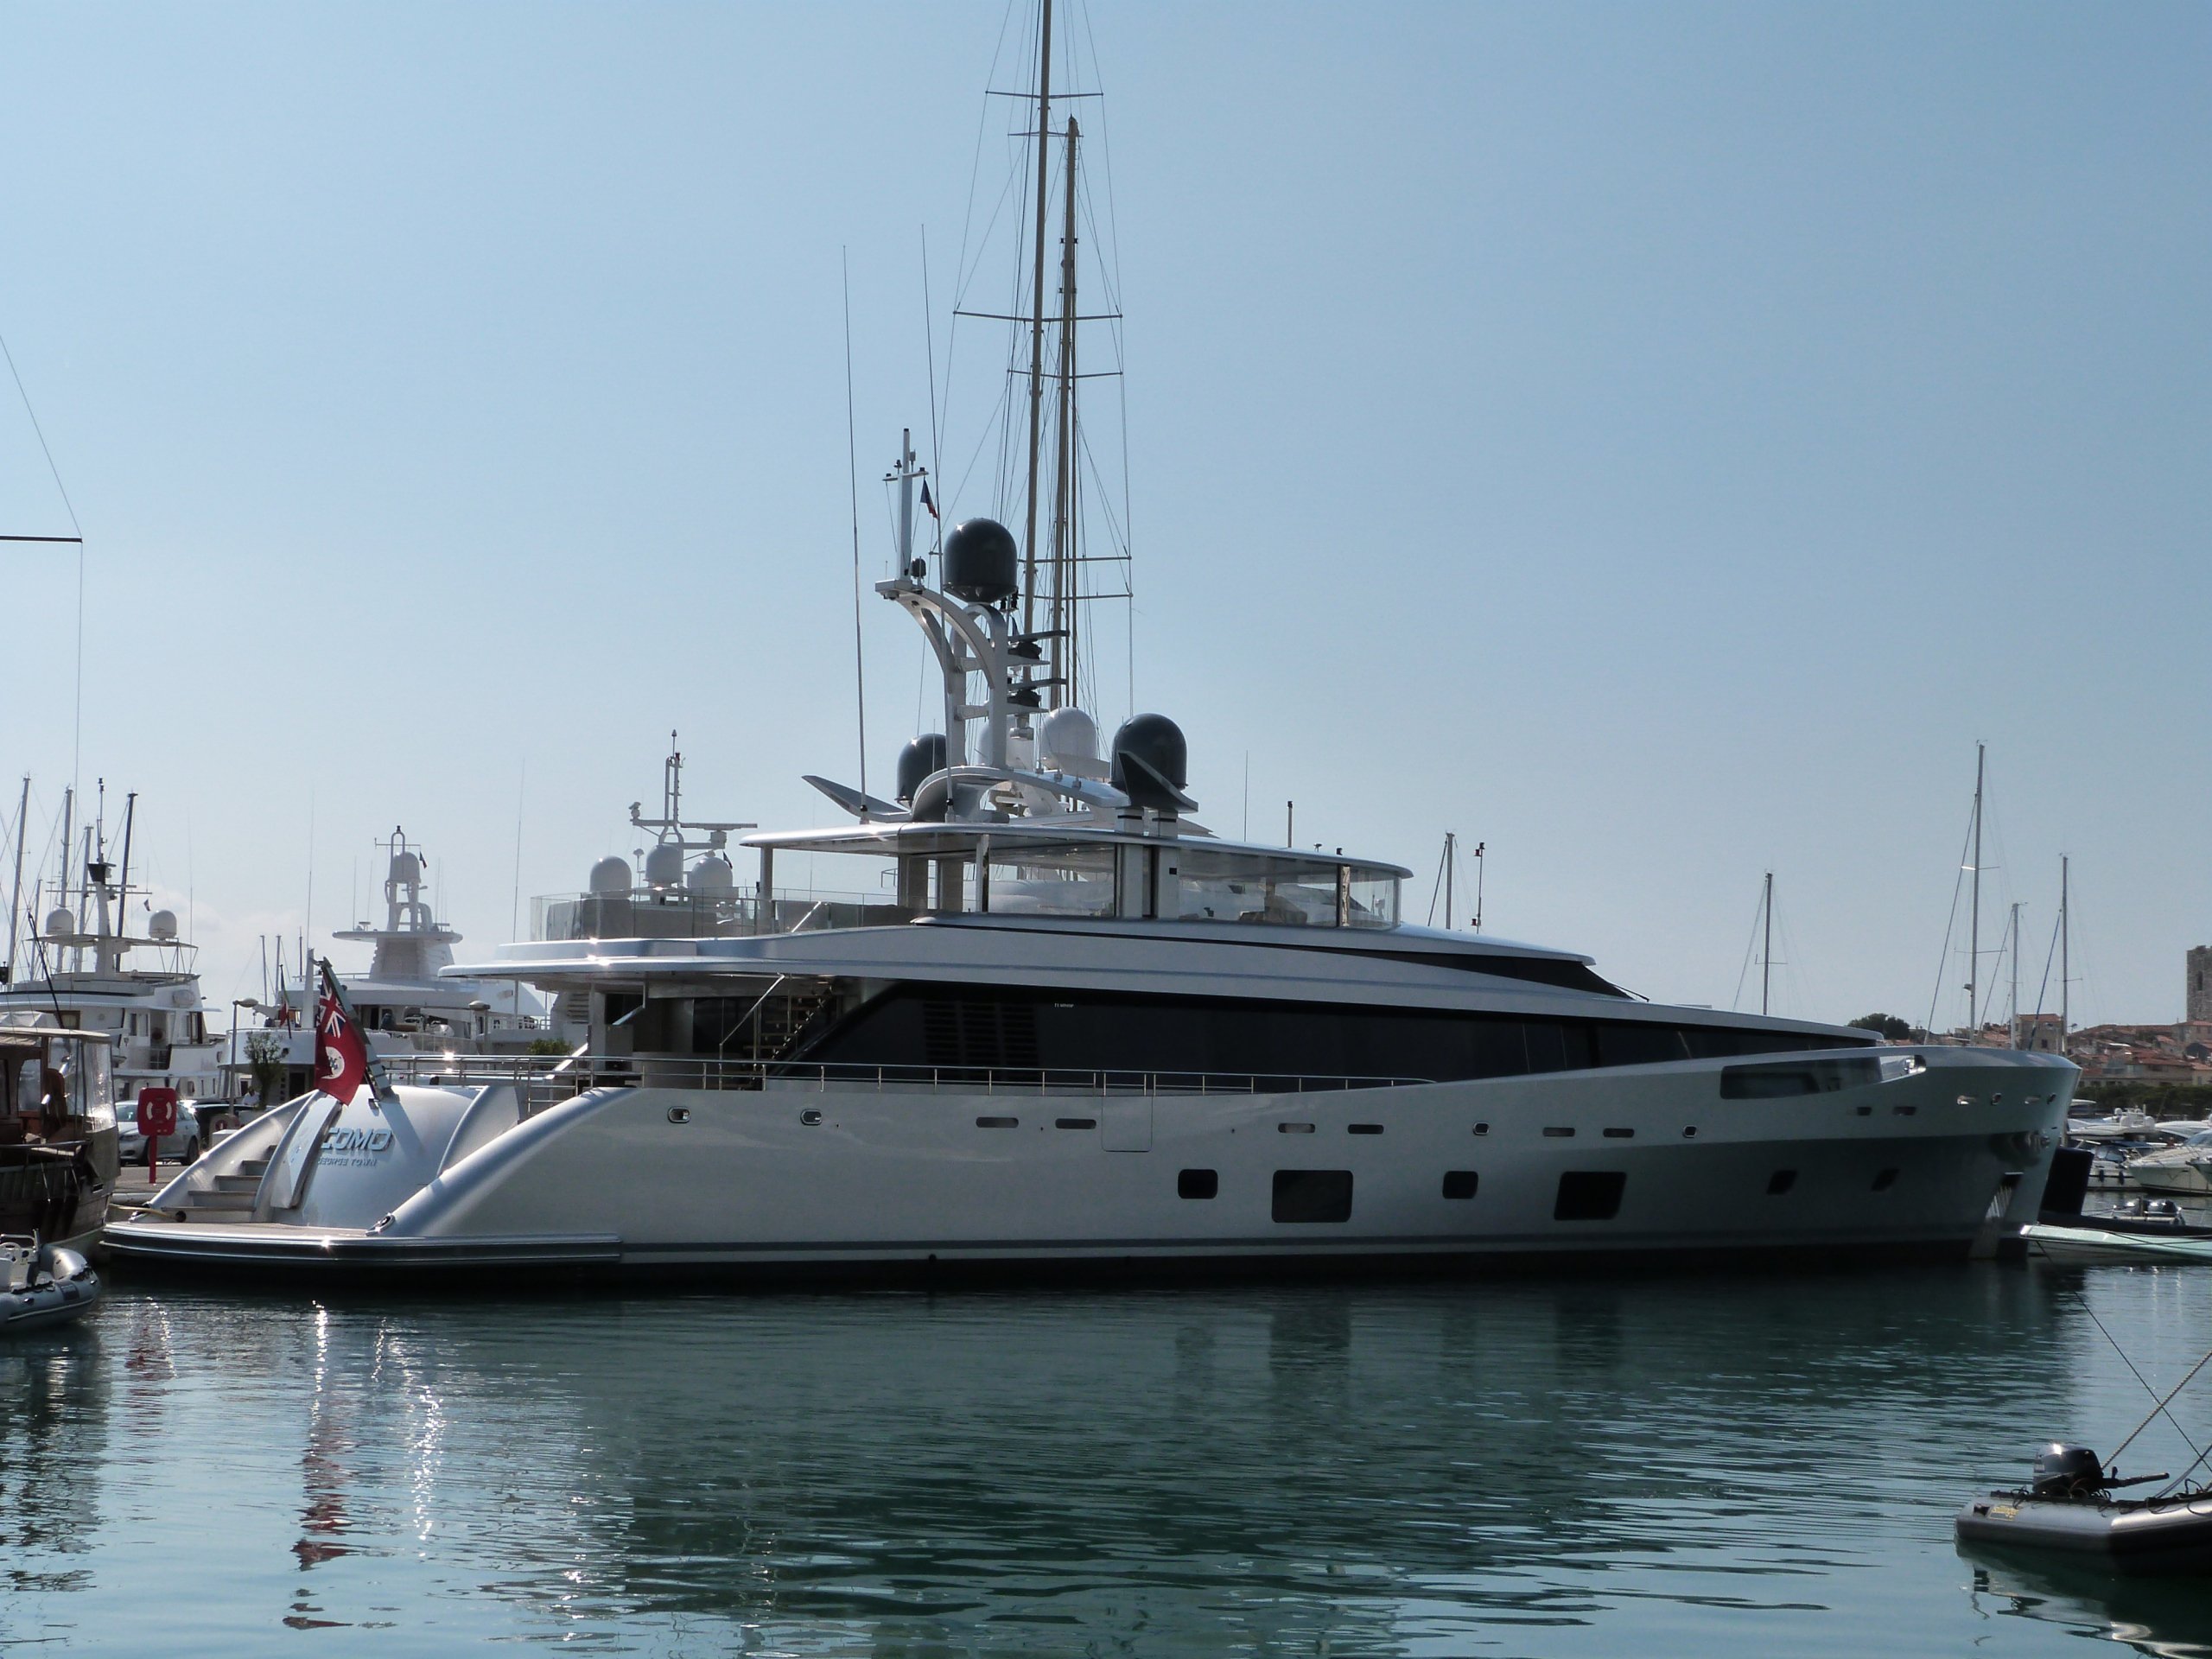 Yacht LADY MAY - Feadship - 2014 - propriétaire Guo Wengui